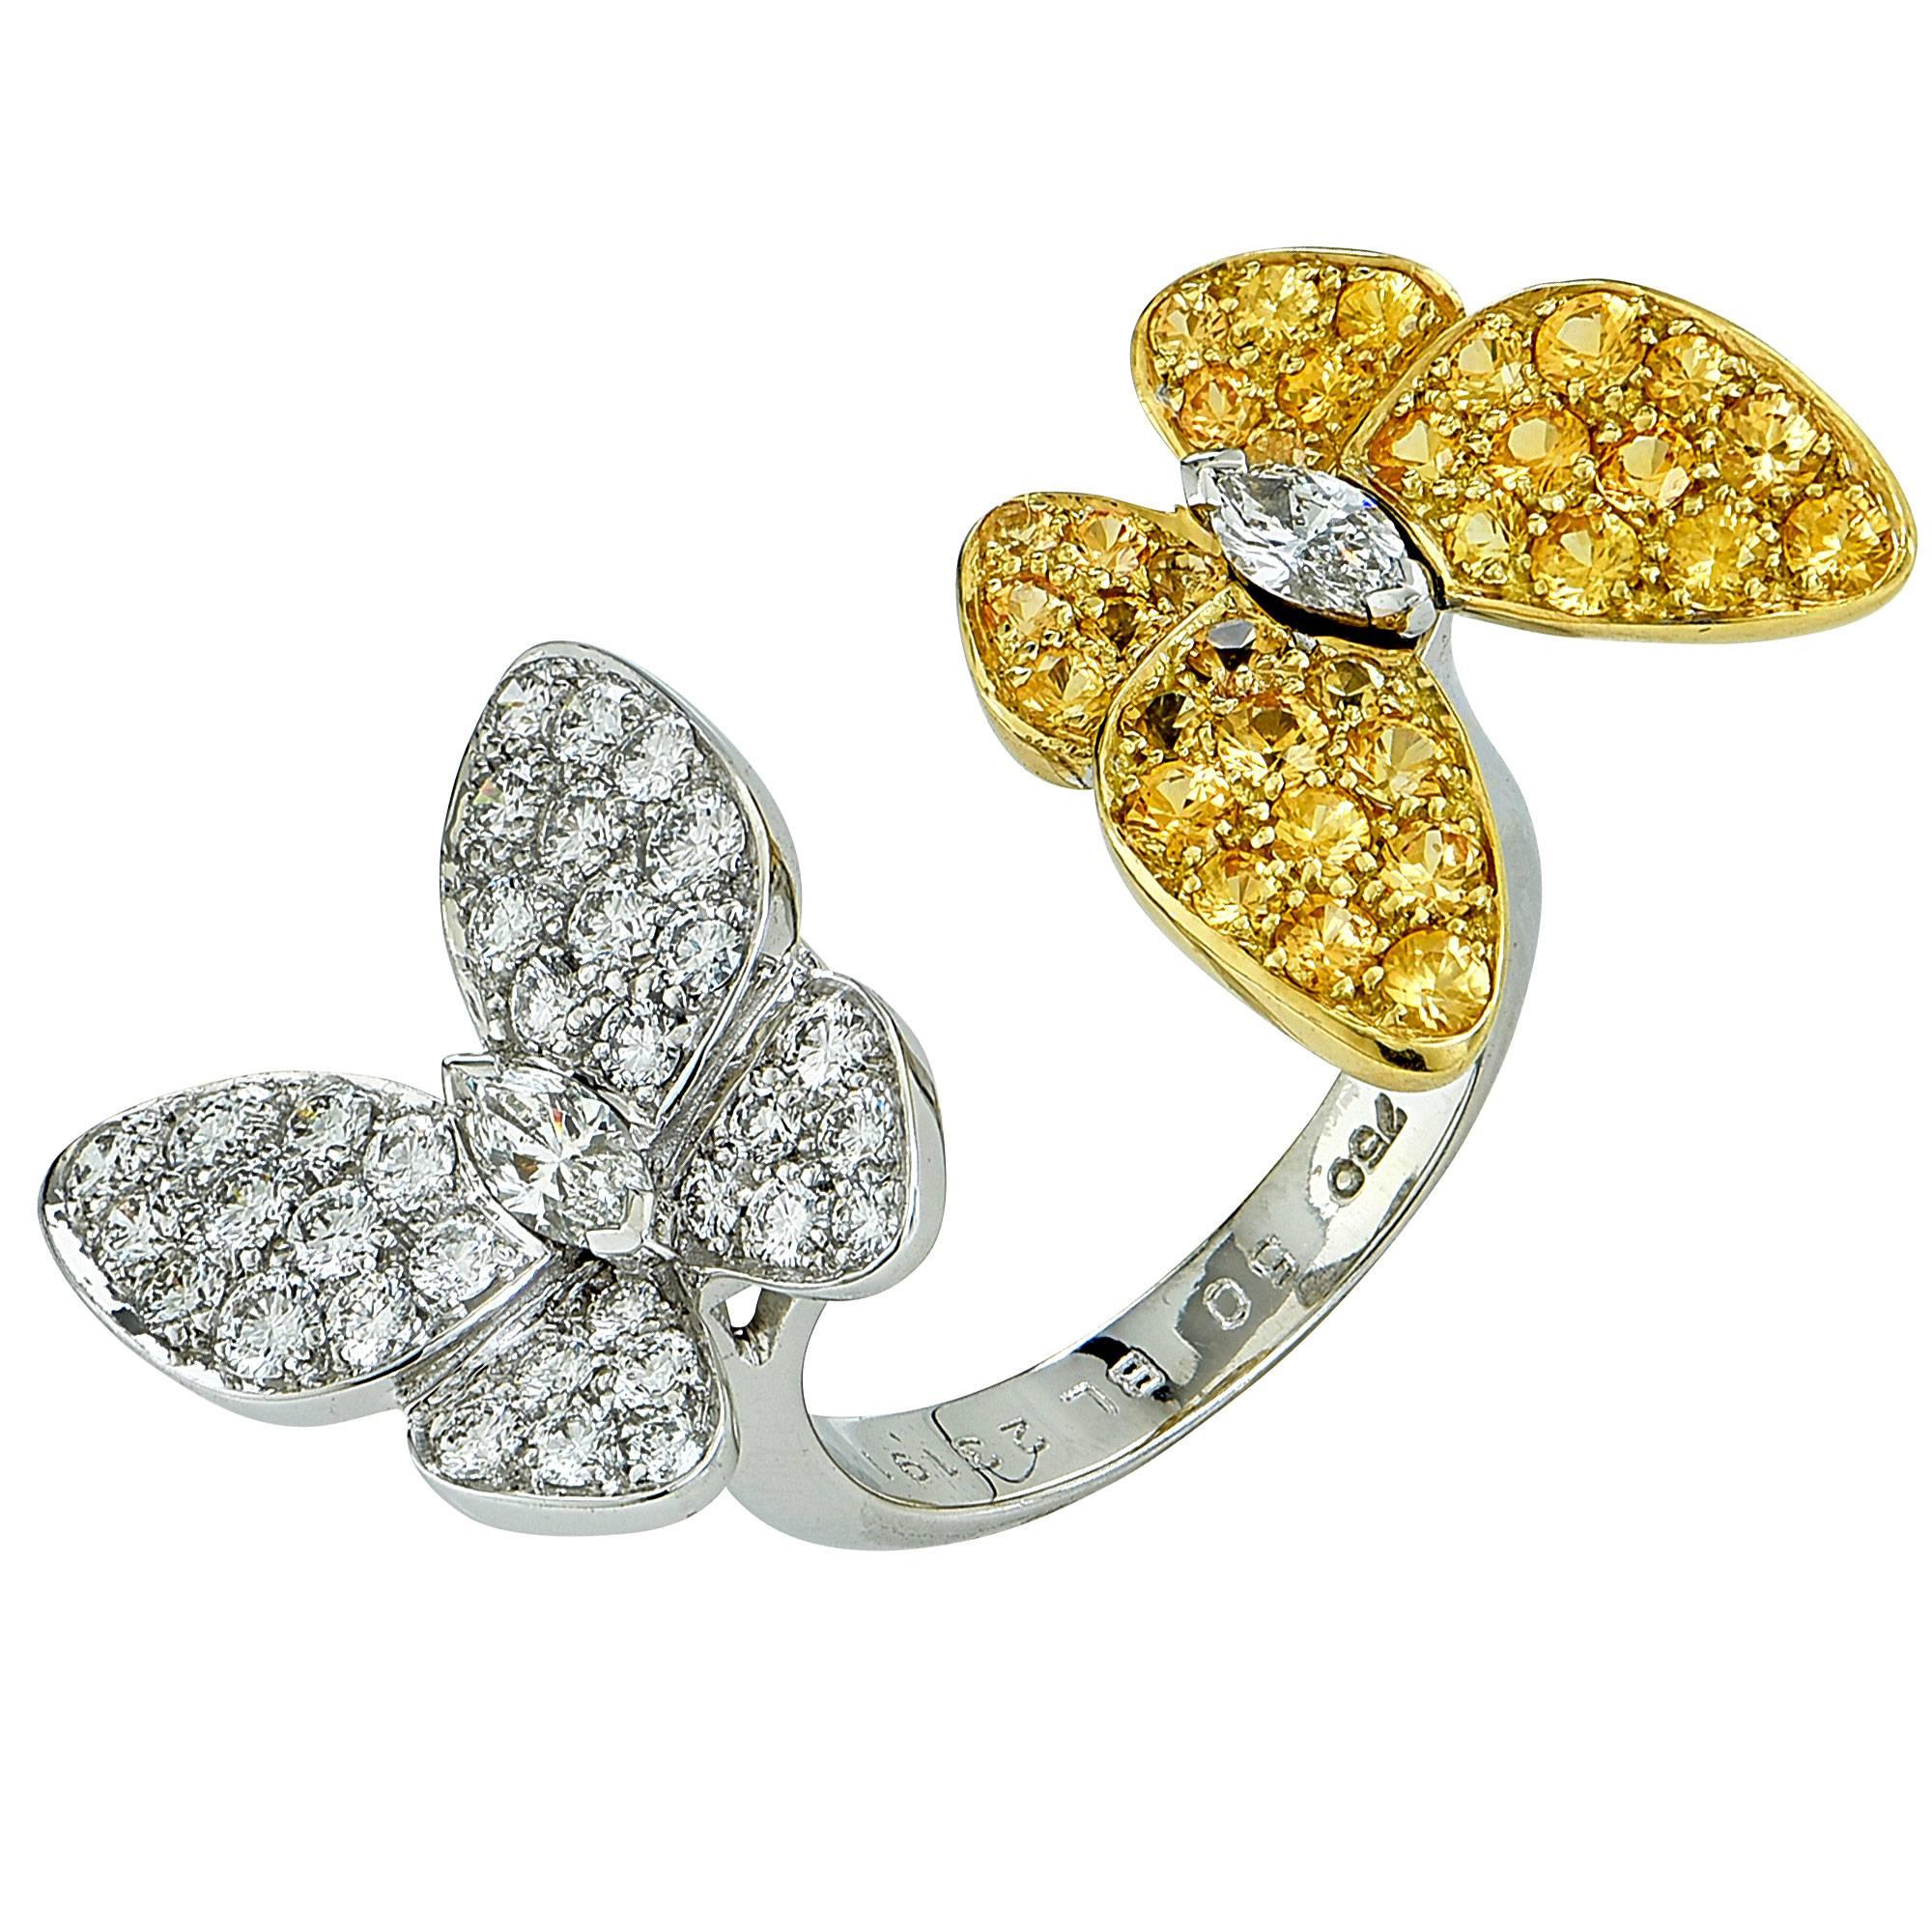 Van Cleef & Arpels Two Butterfly Between the Finger Ring